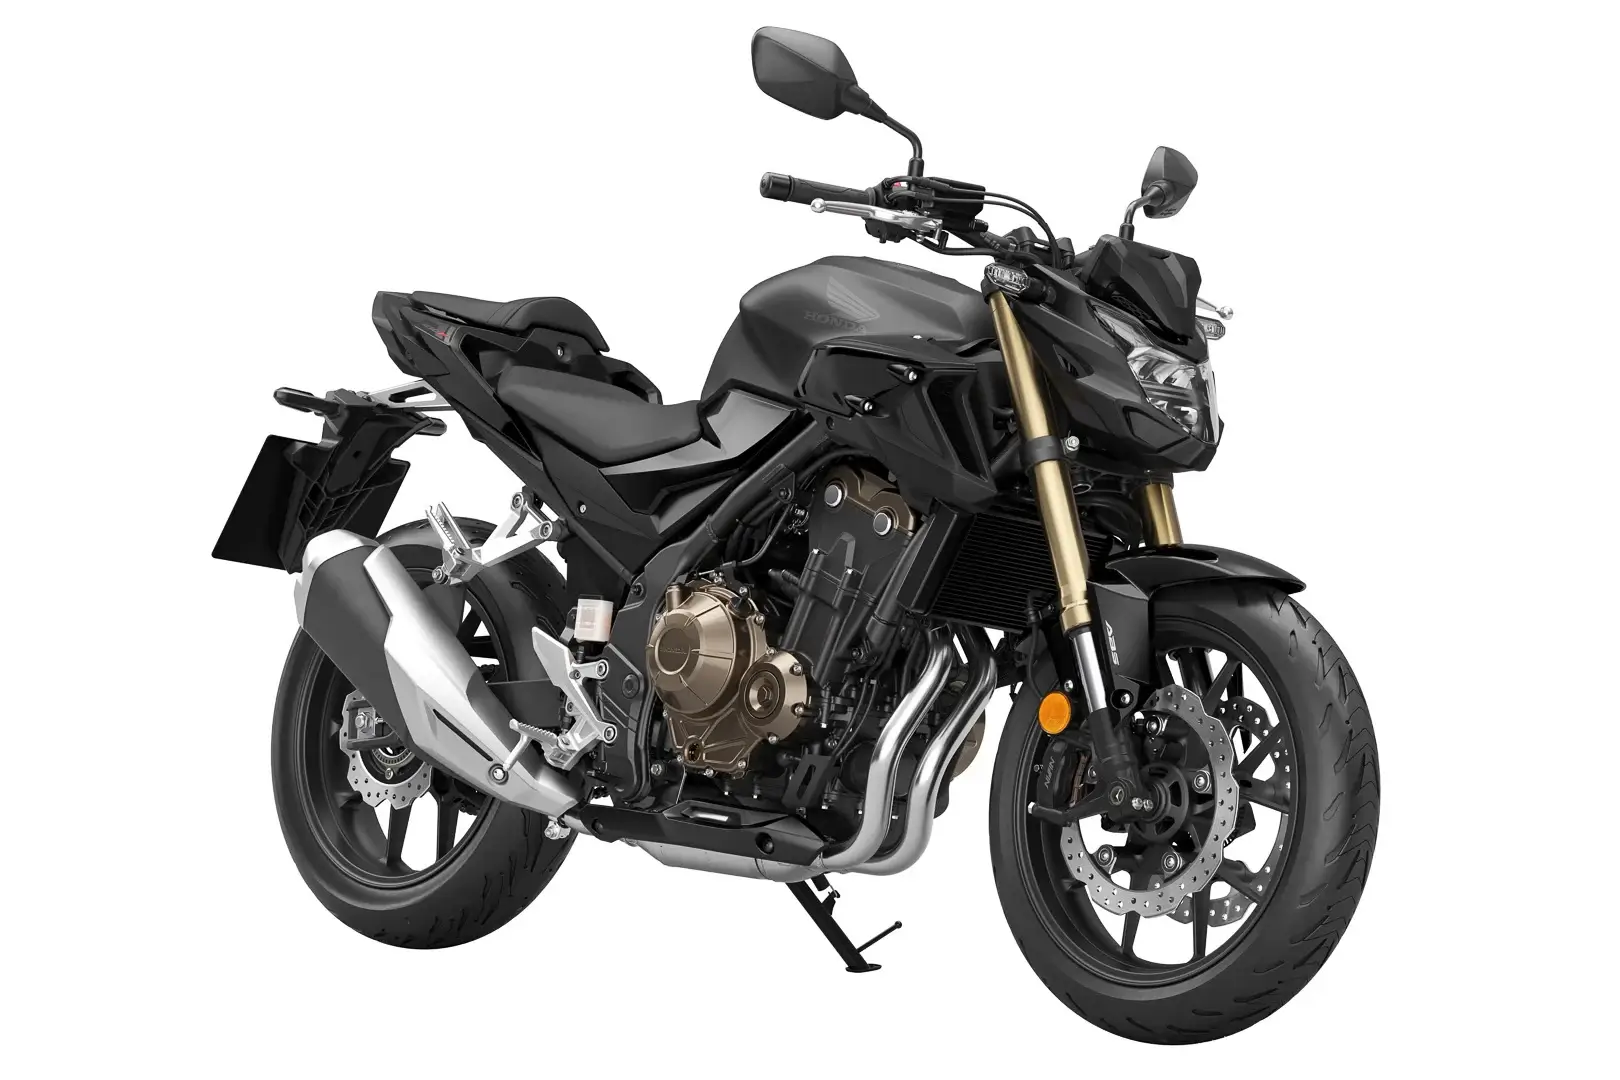 2022-honda-cb500f-black as one of the fastest 500cc motorcycles